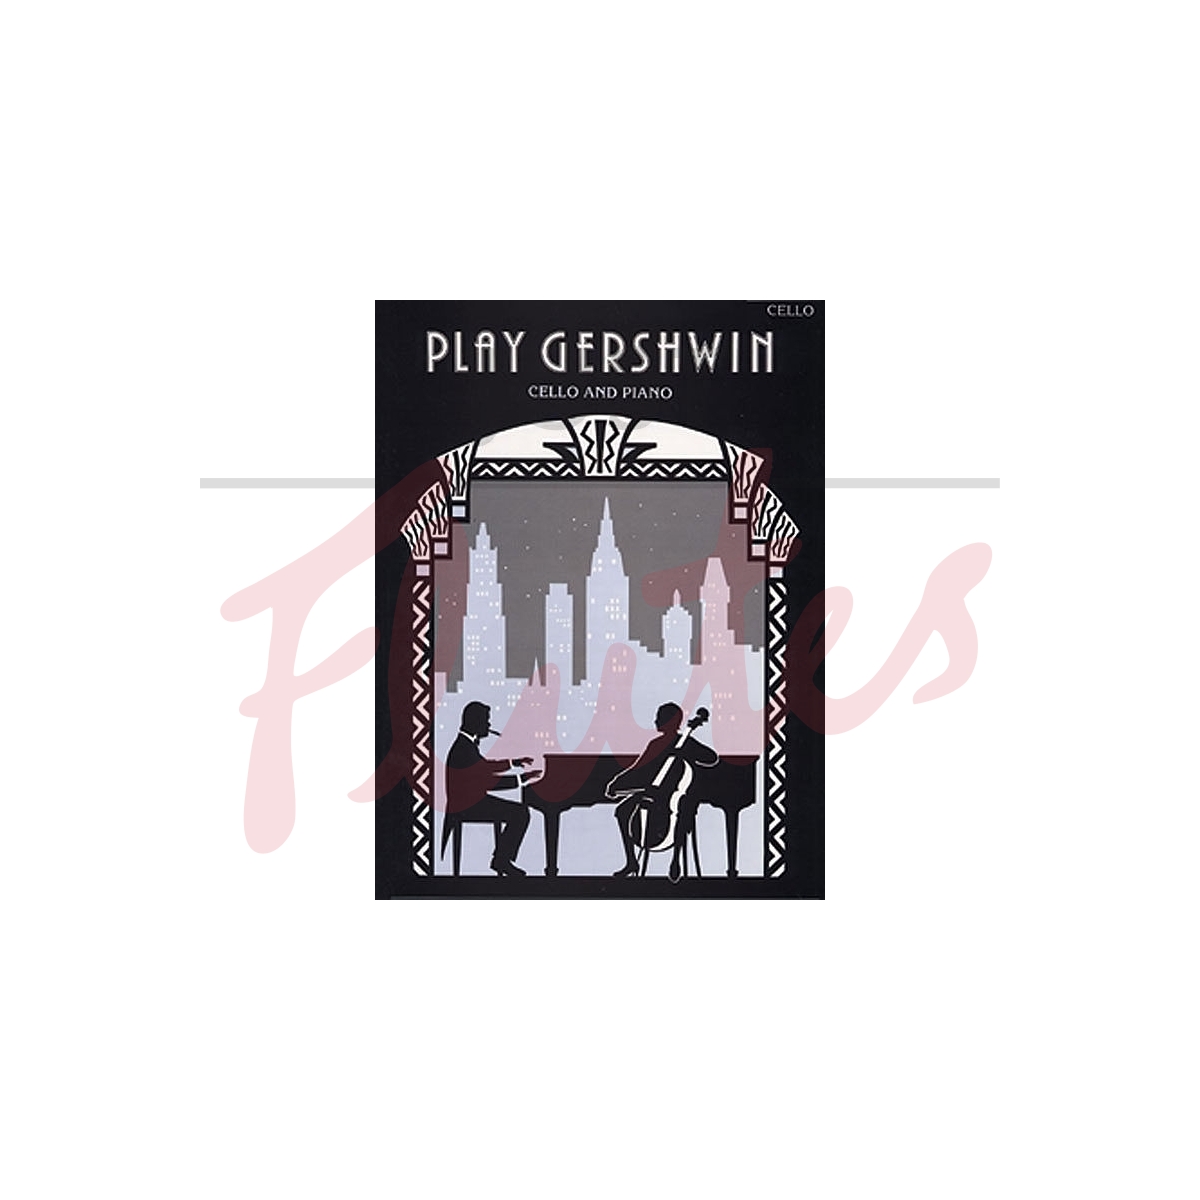 Play Gershwin for Cello and Piano